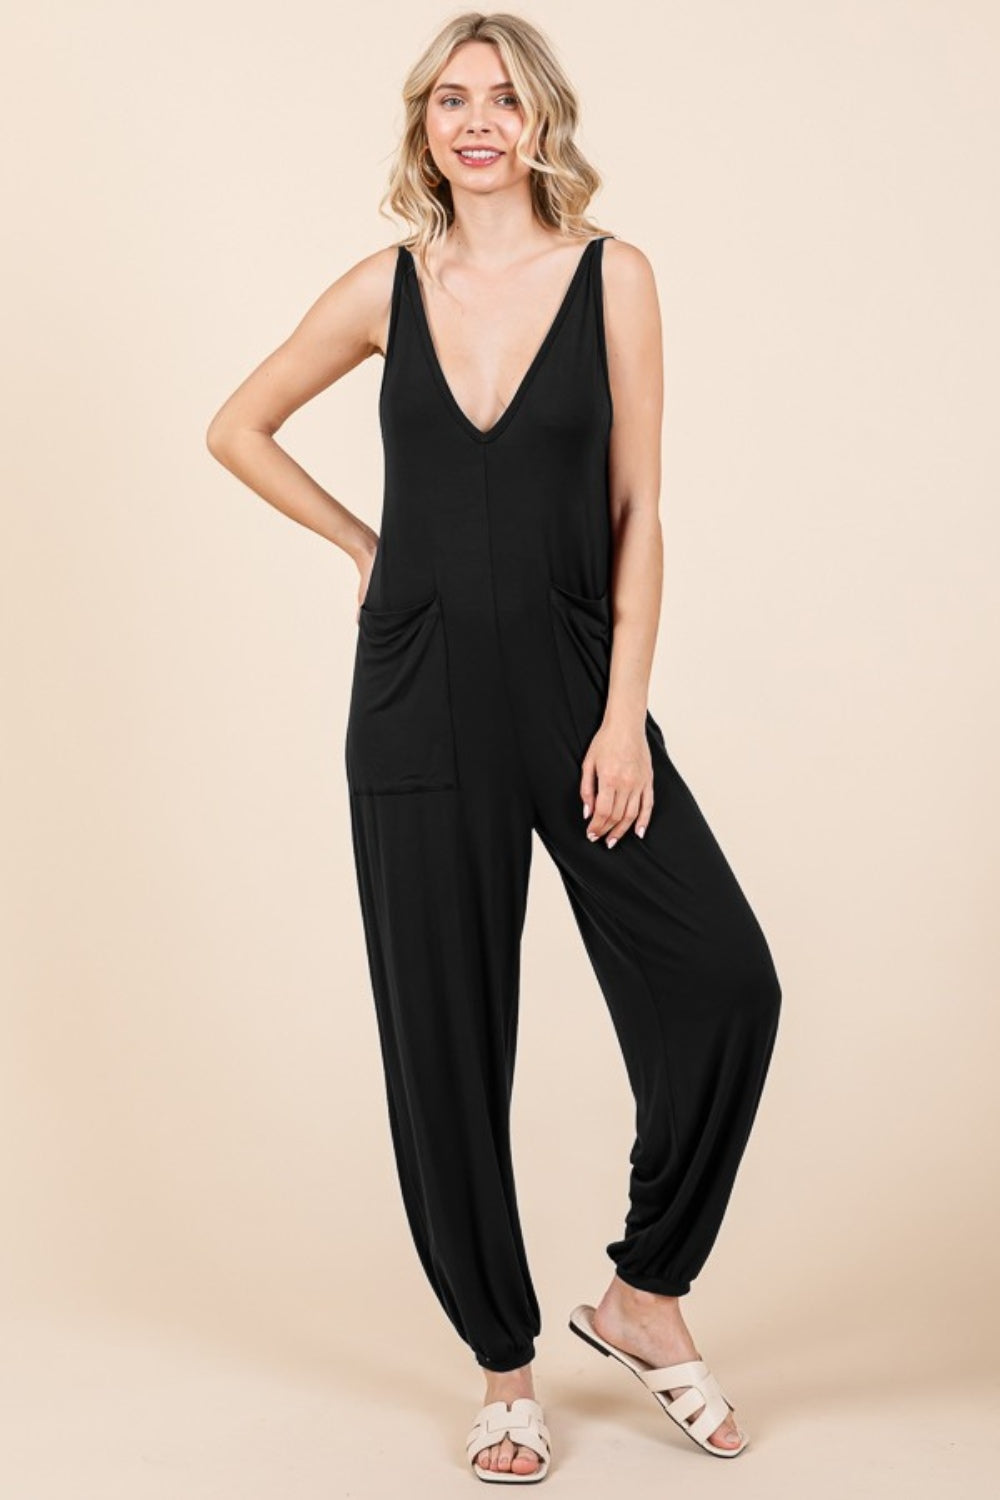 Culture Code Full Size Plunge Sleeveless Jumpsuit with Pockets Sunset and Swim Black S 